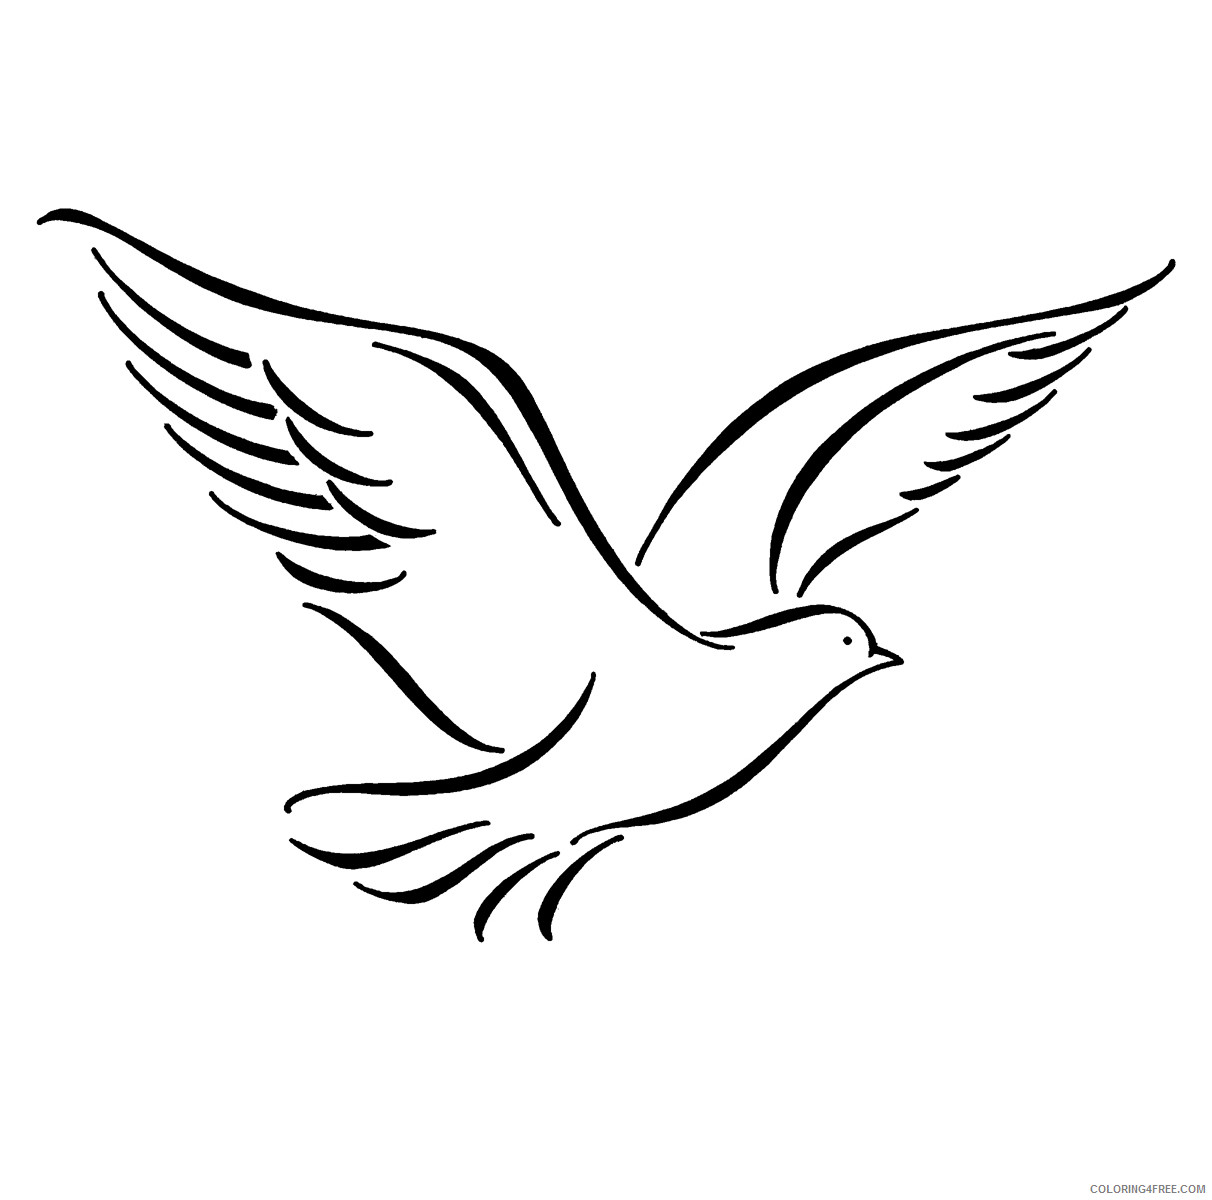 Dove Silhouette Coloring Pages dove art dove graphic Printable Coloring4free